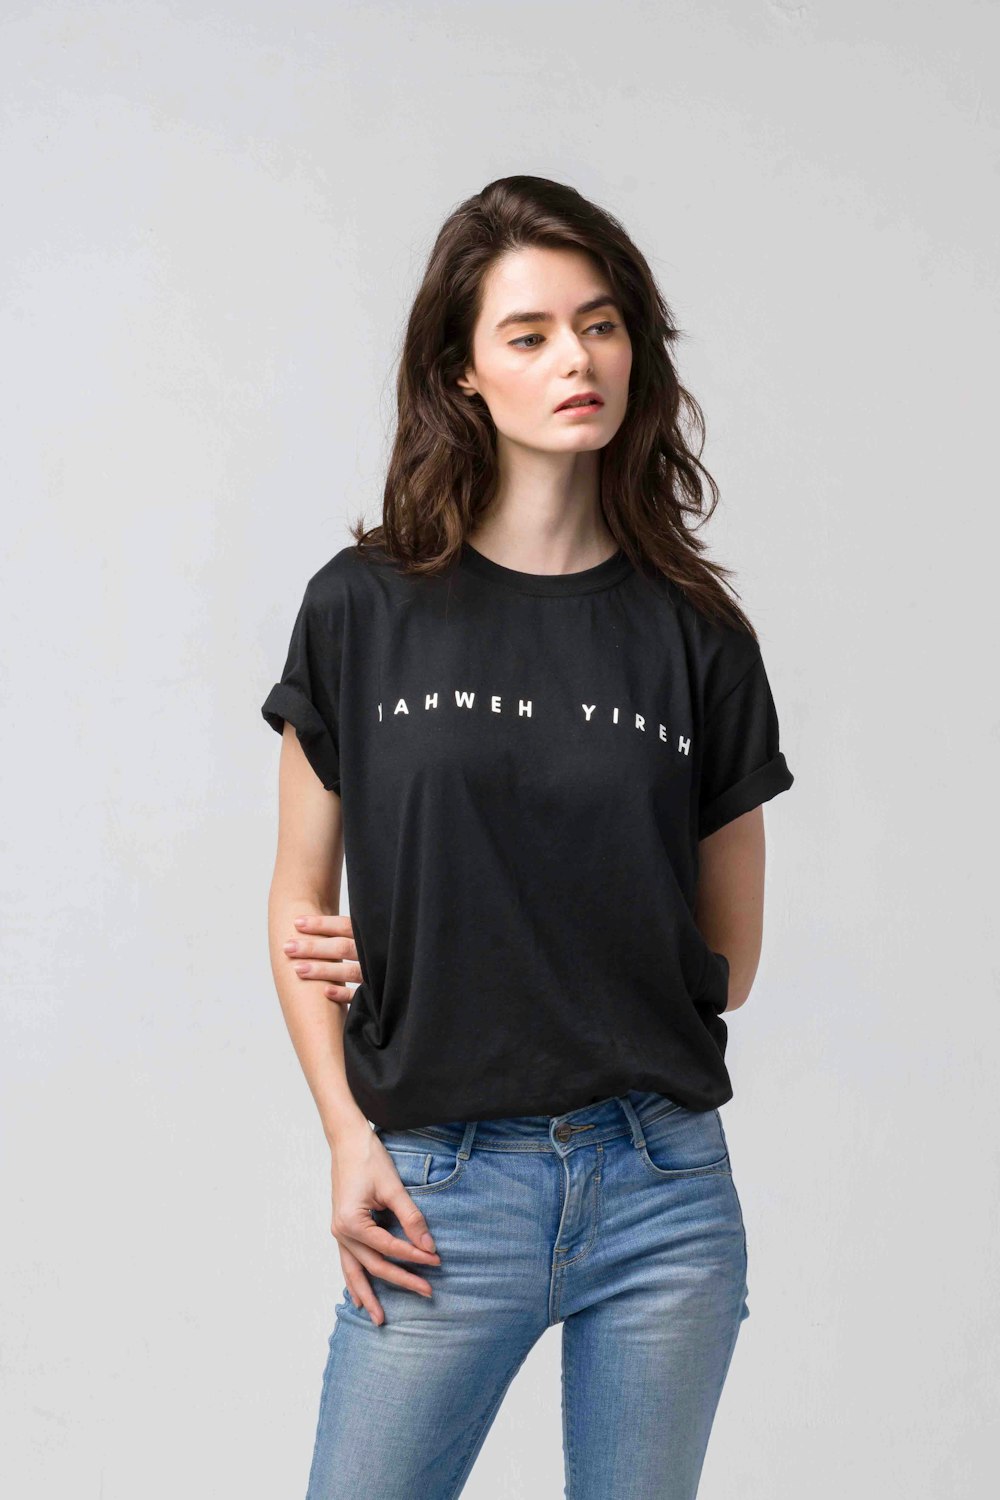 woman in black crew neck t-shirt and blue denim jeans